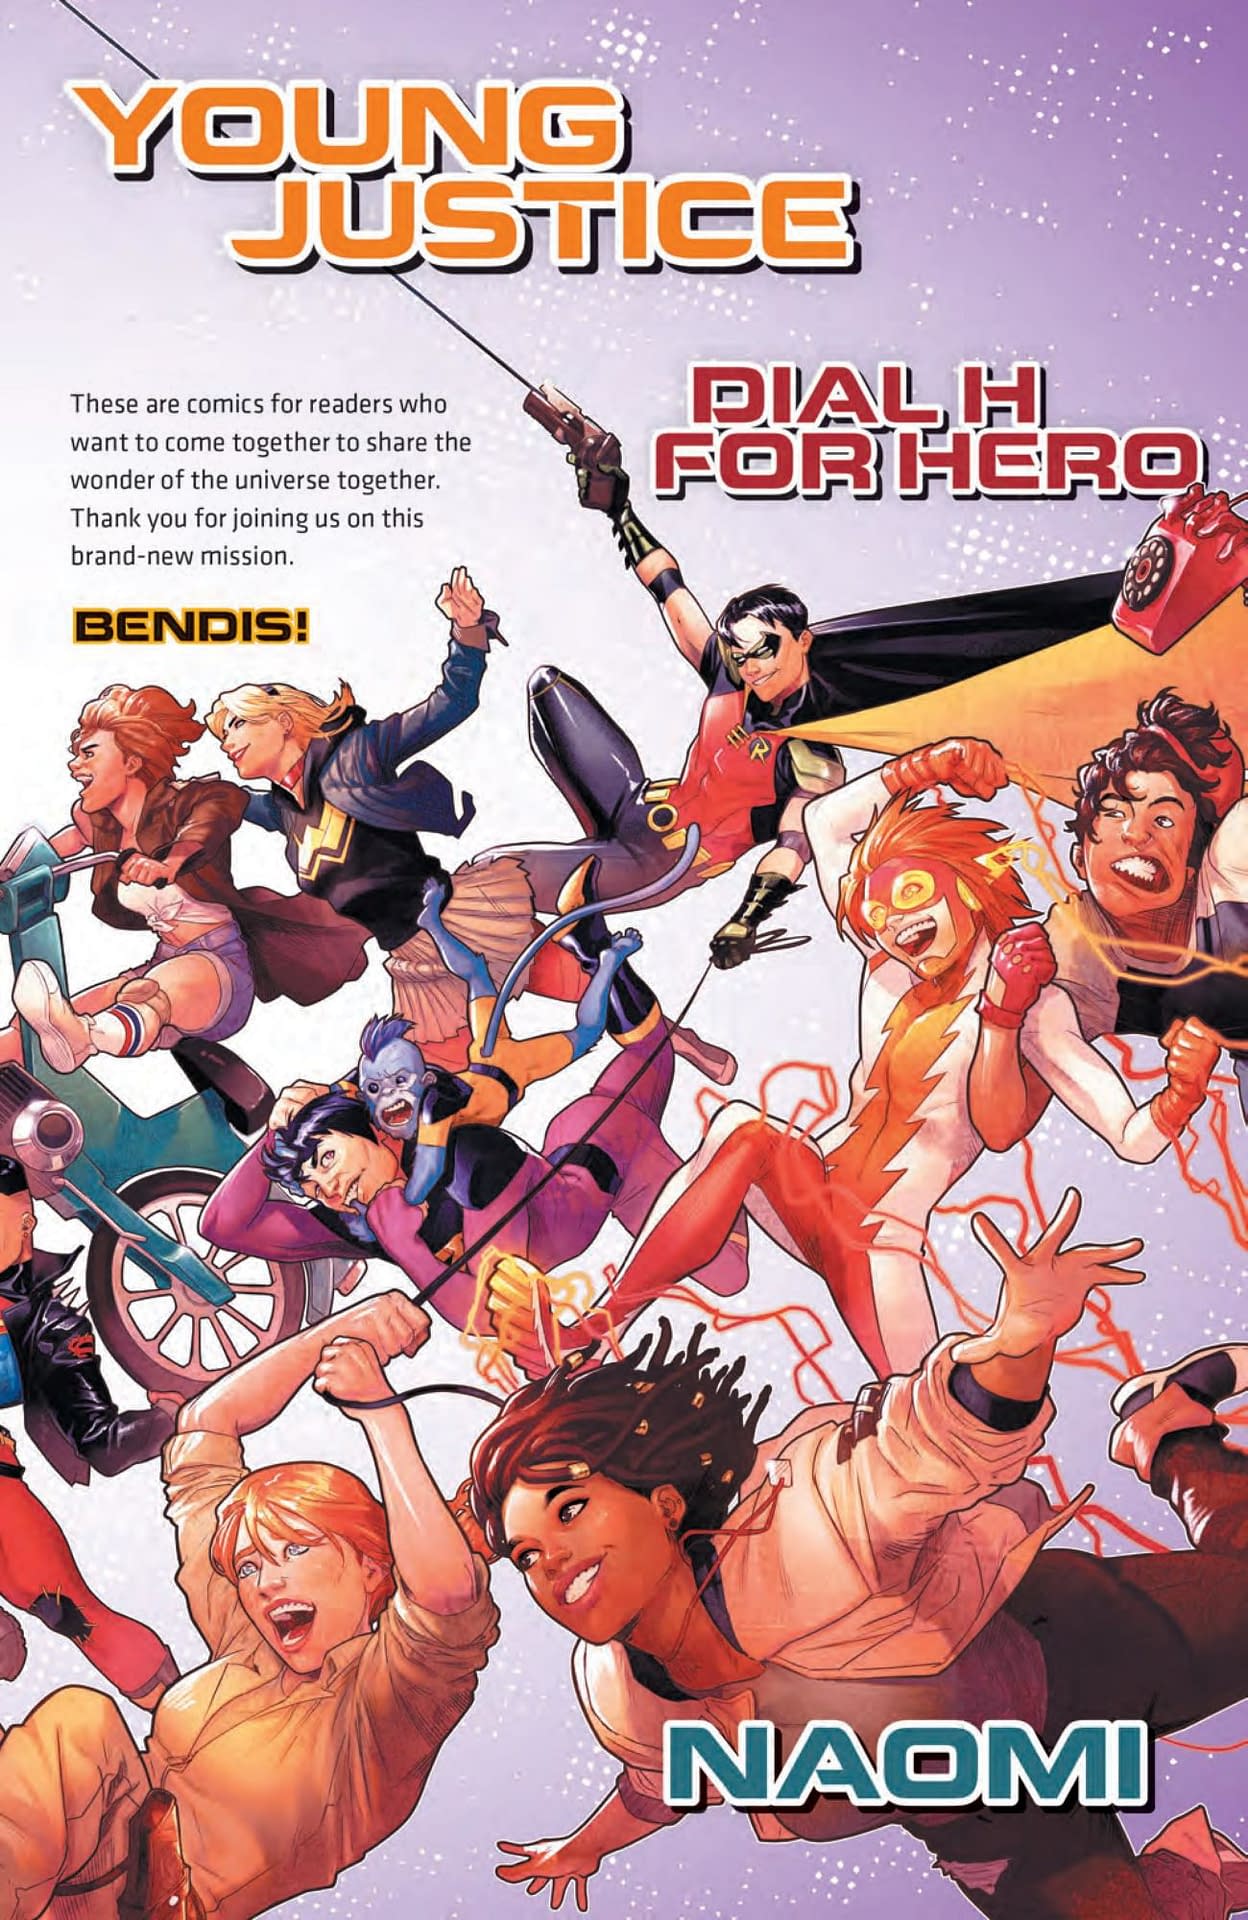 DC Comics Change Young Justice #1 Cover to Feature the Girls as Well as The Boys